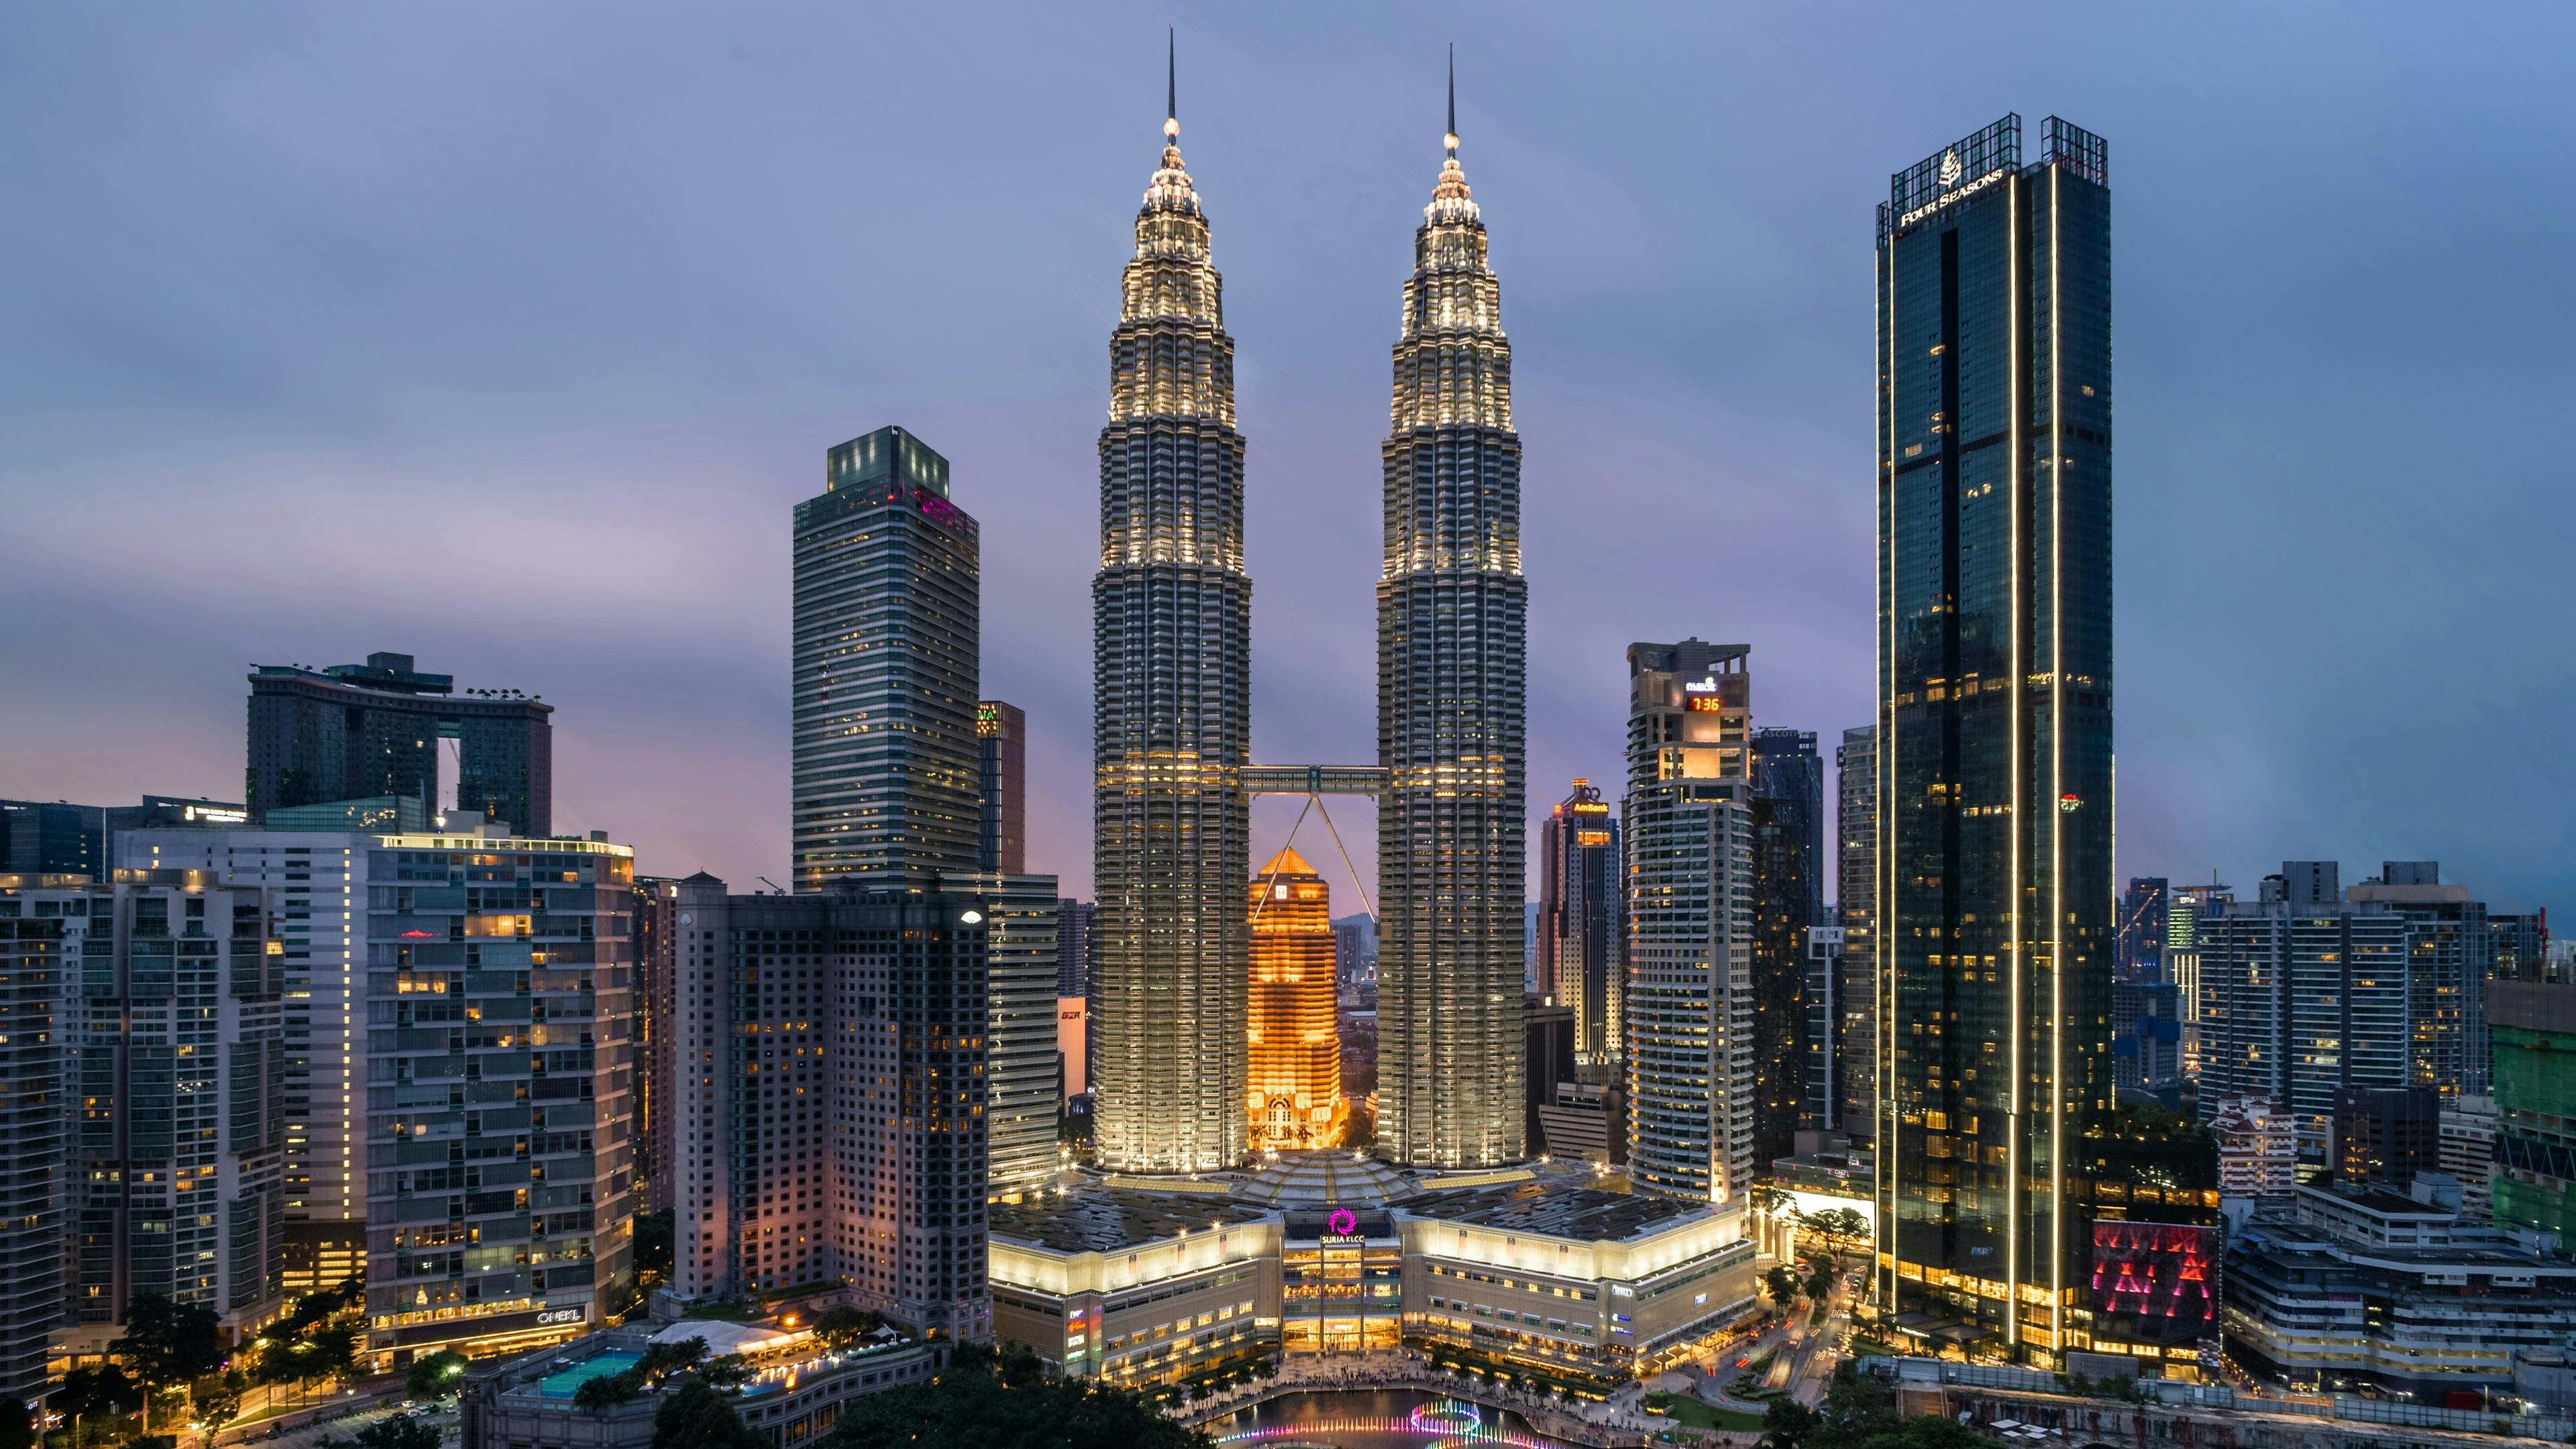 Kuala Lumpur skyline with the Petronas Twin Towers in the center at dusk